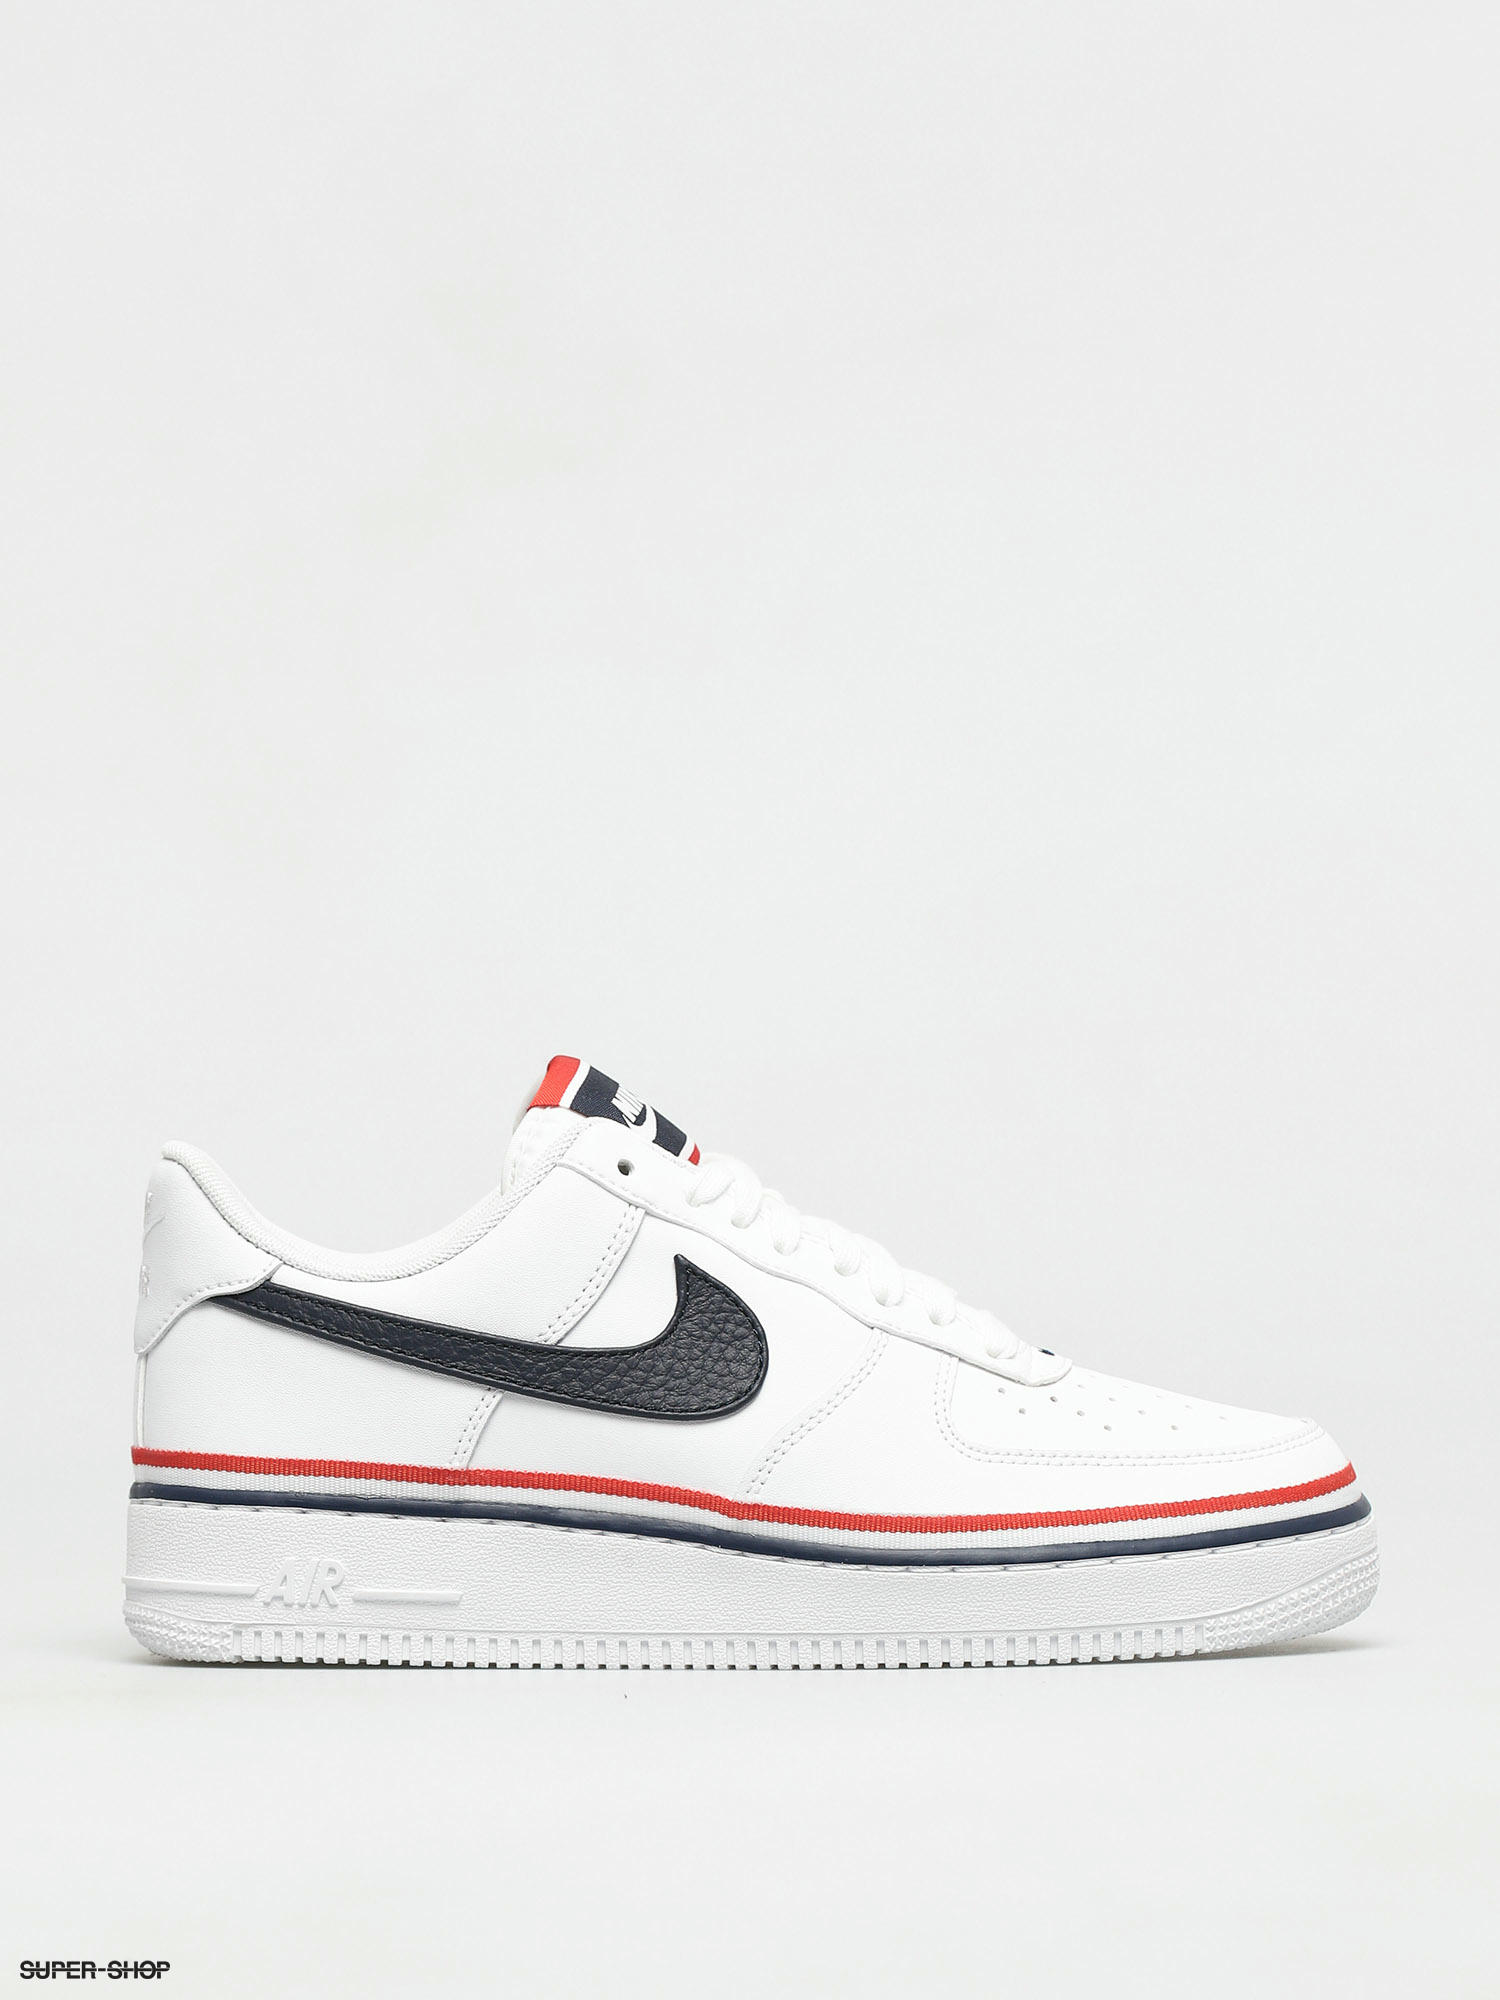 Nike Air Force 1 '07 LV8 White/ Red/Obsidian, Drops